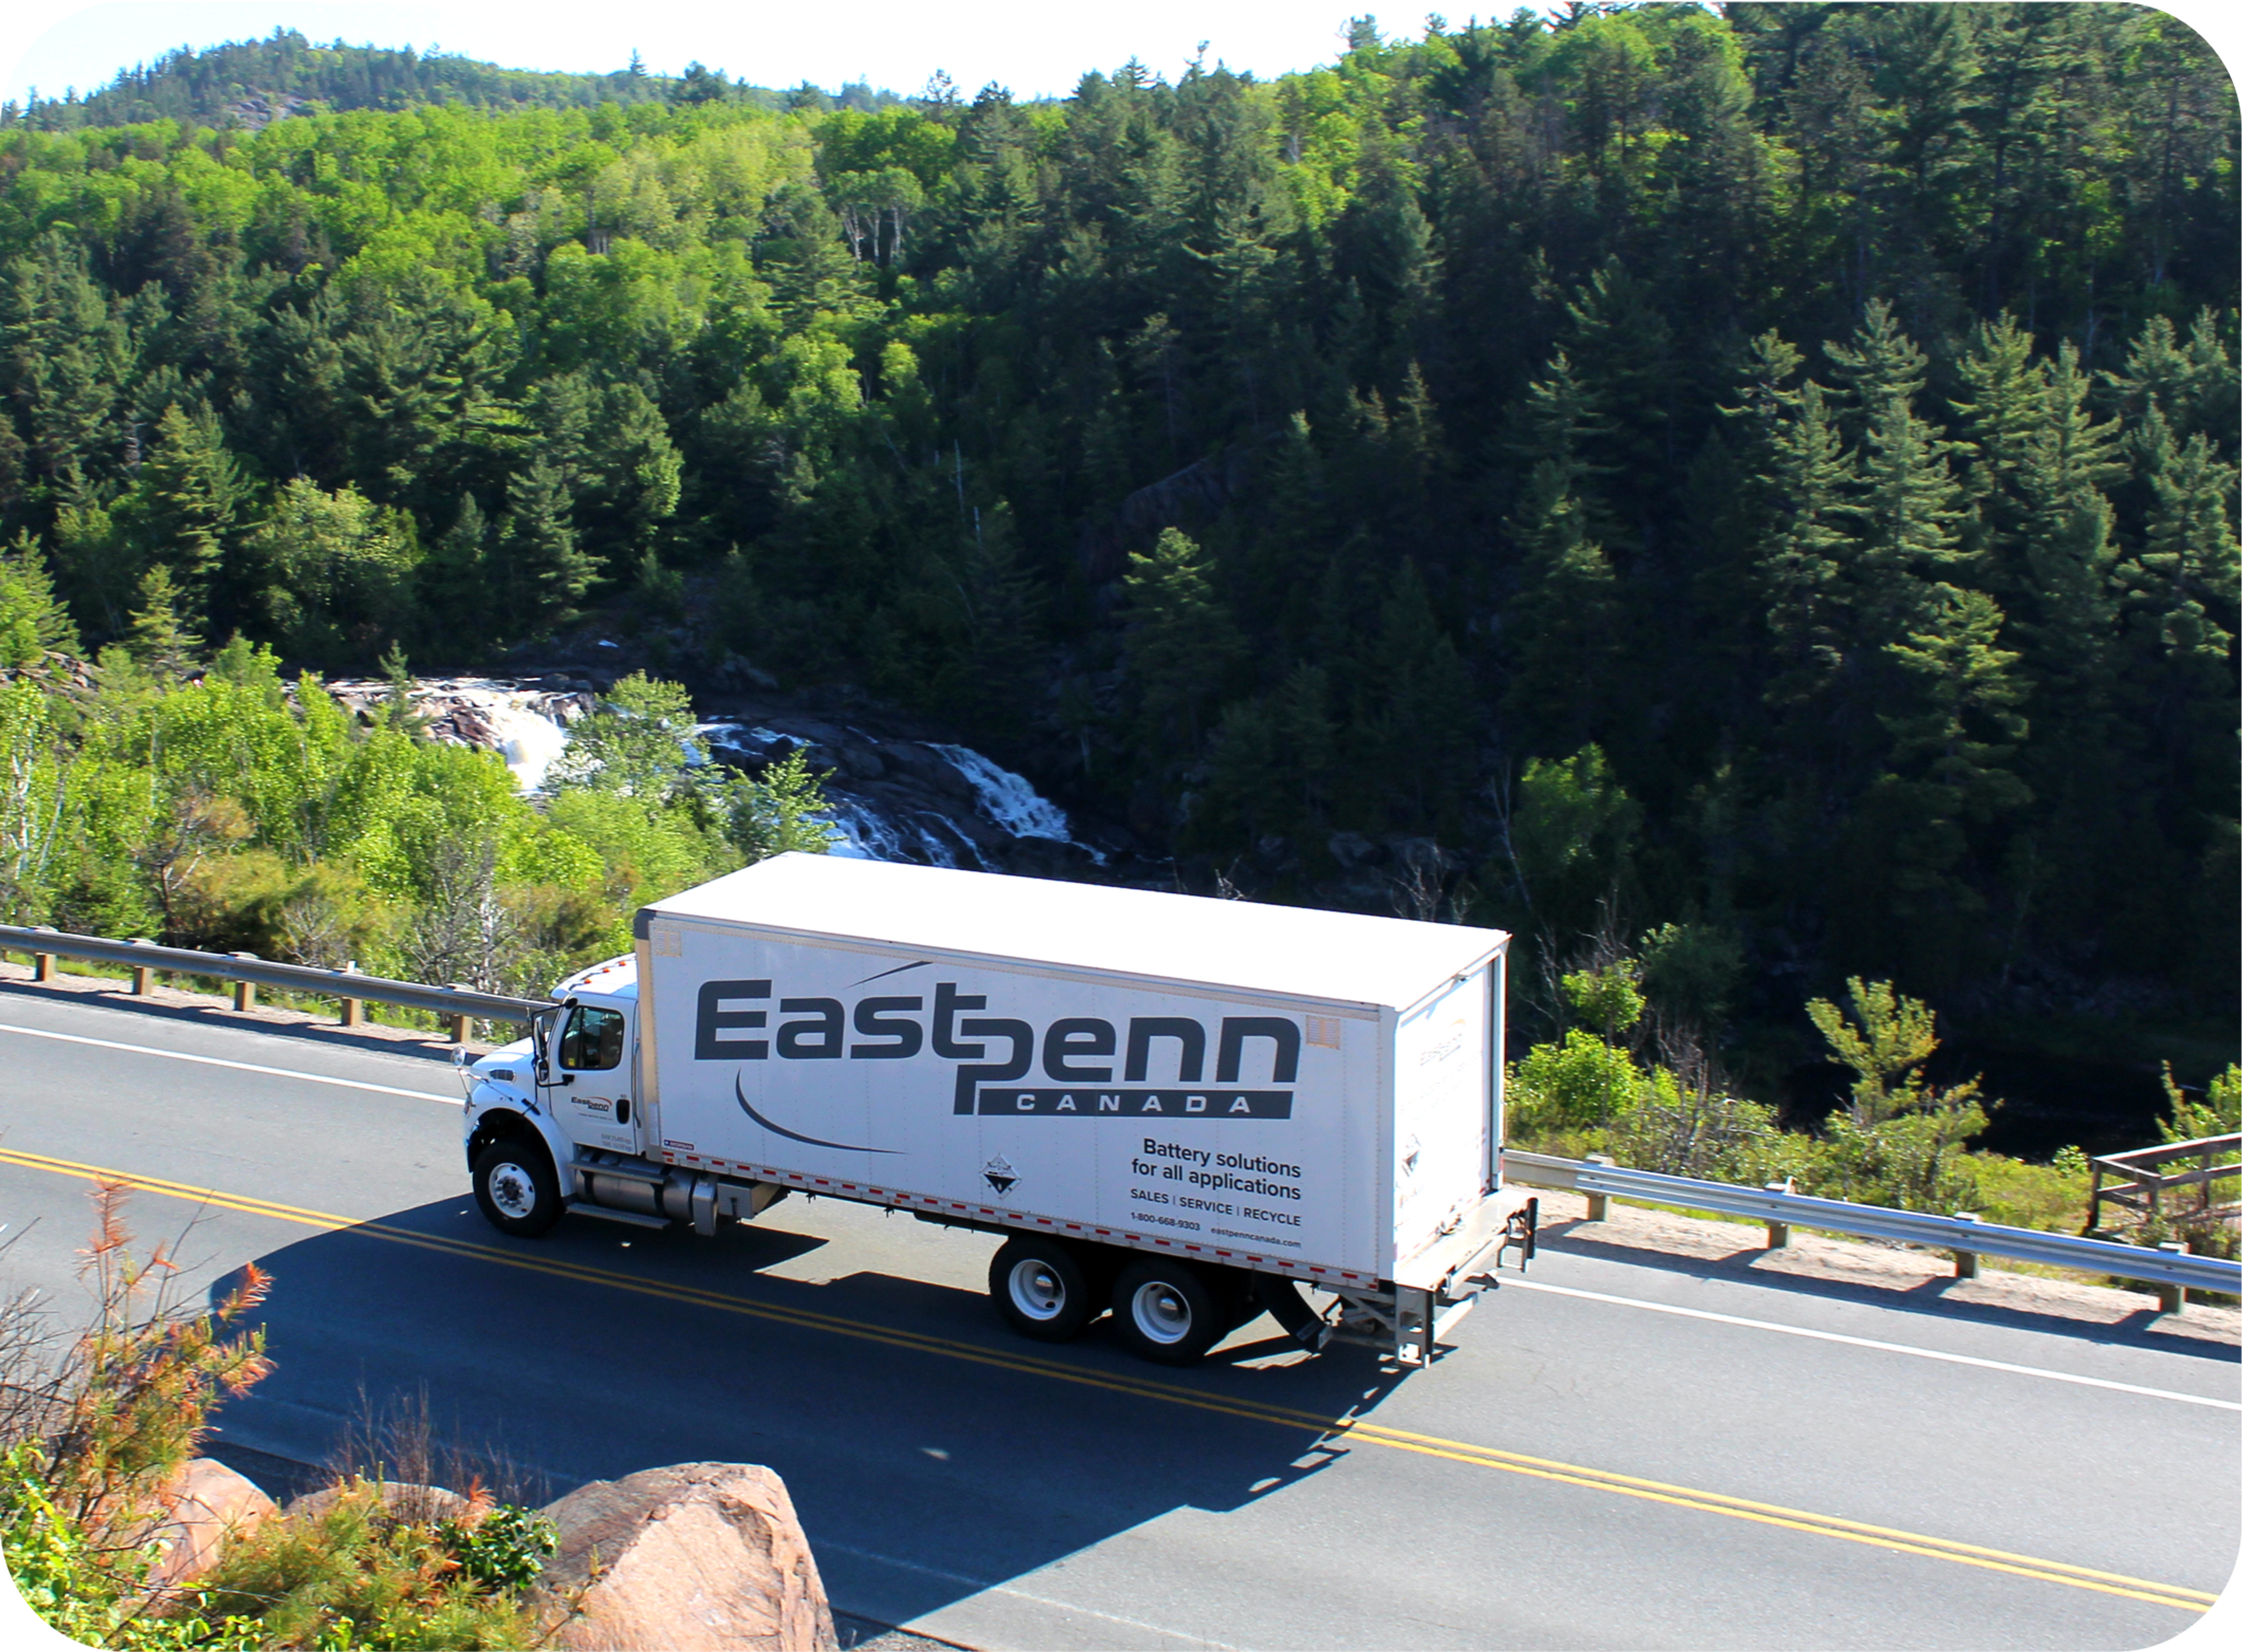 Picture of birds eye view of East Penn branded truck on a highway surrounded by trees